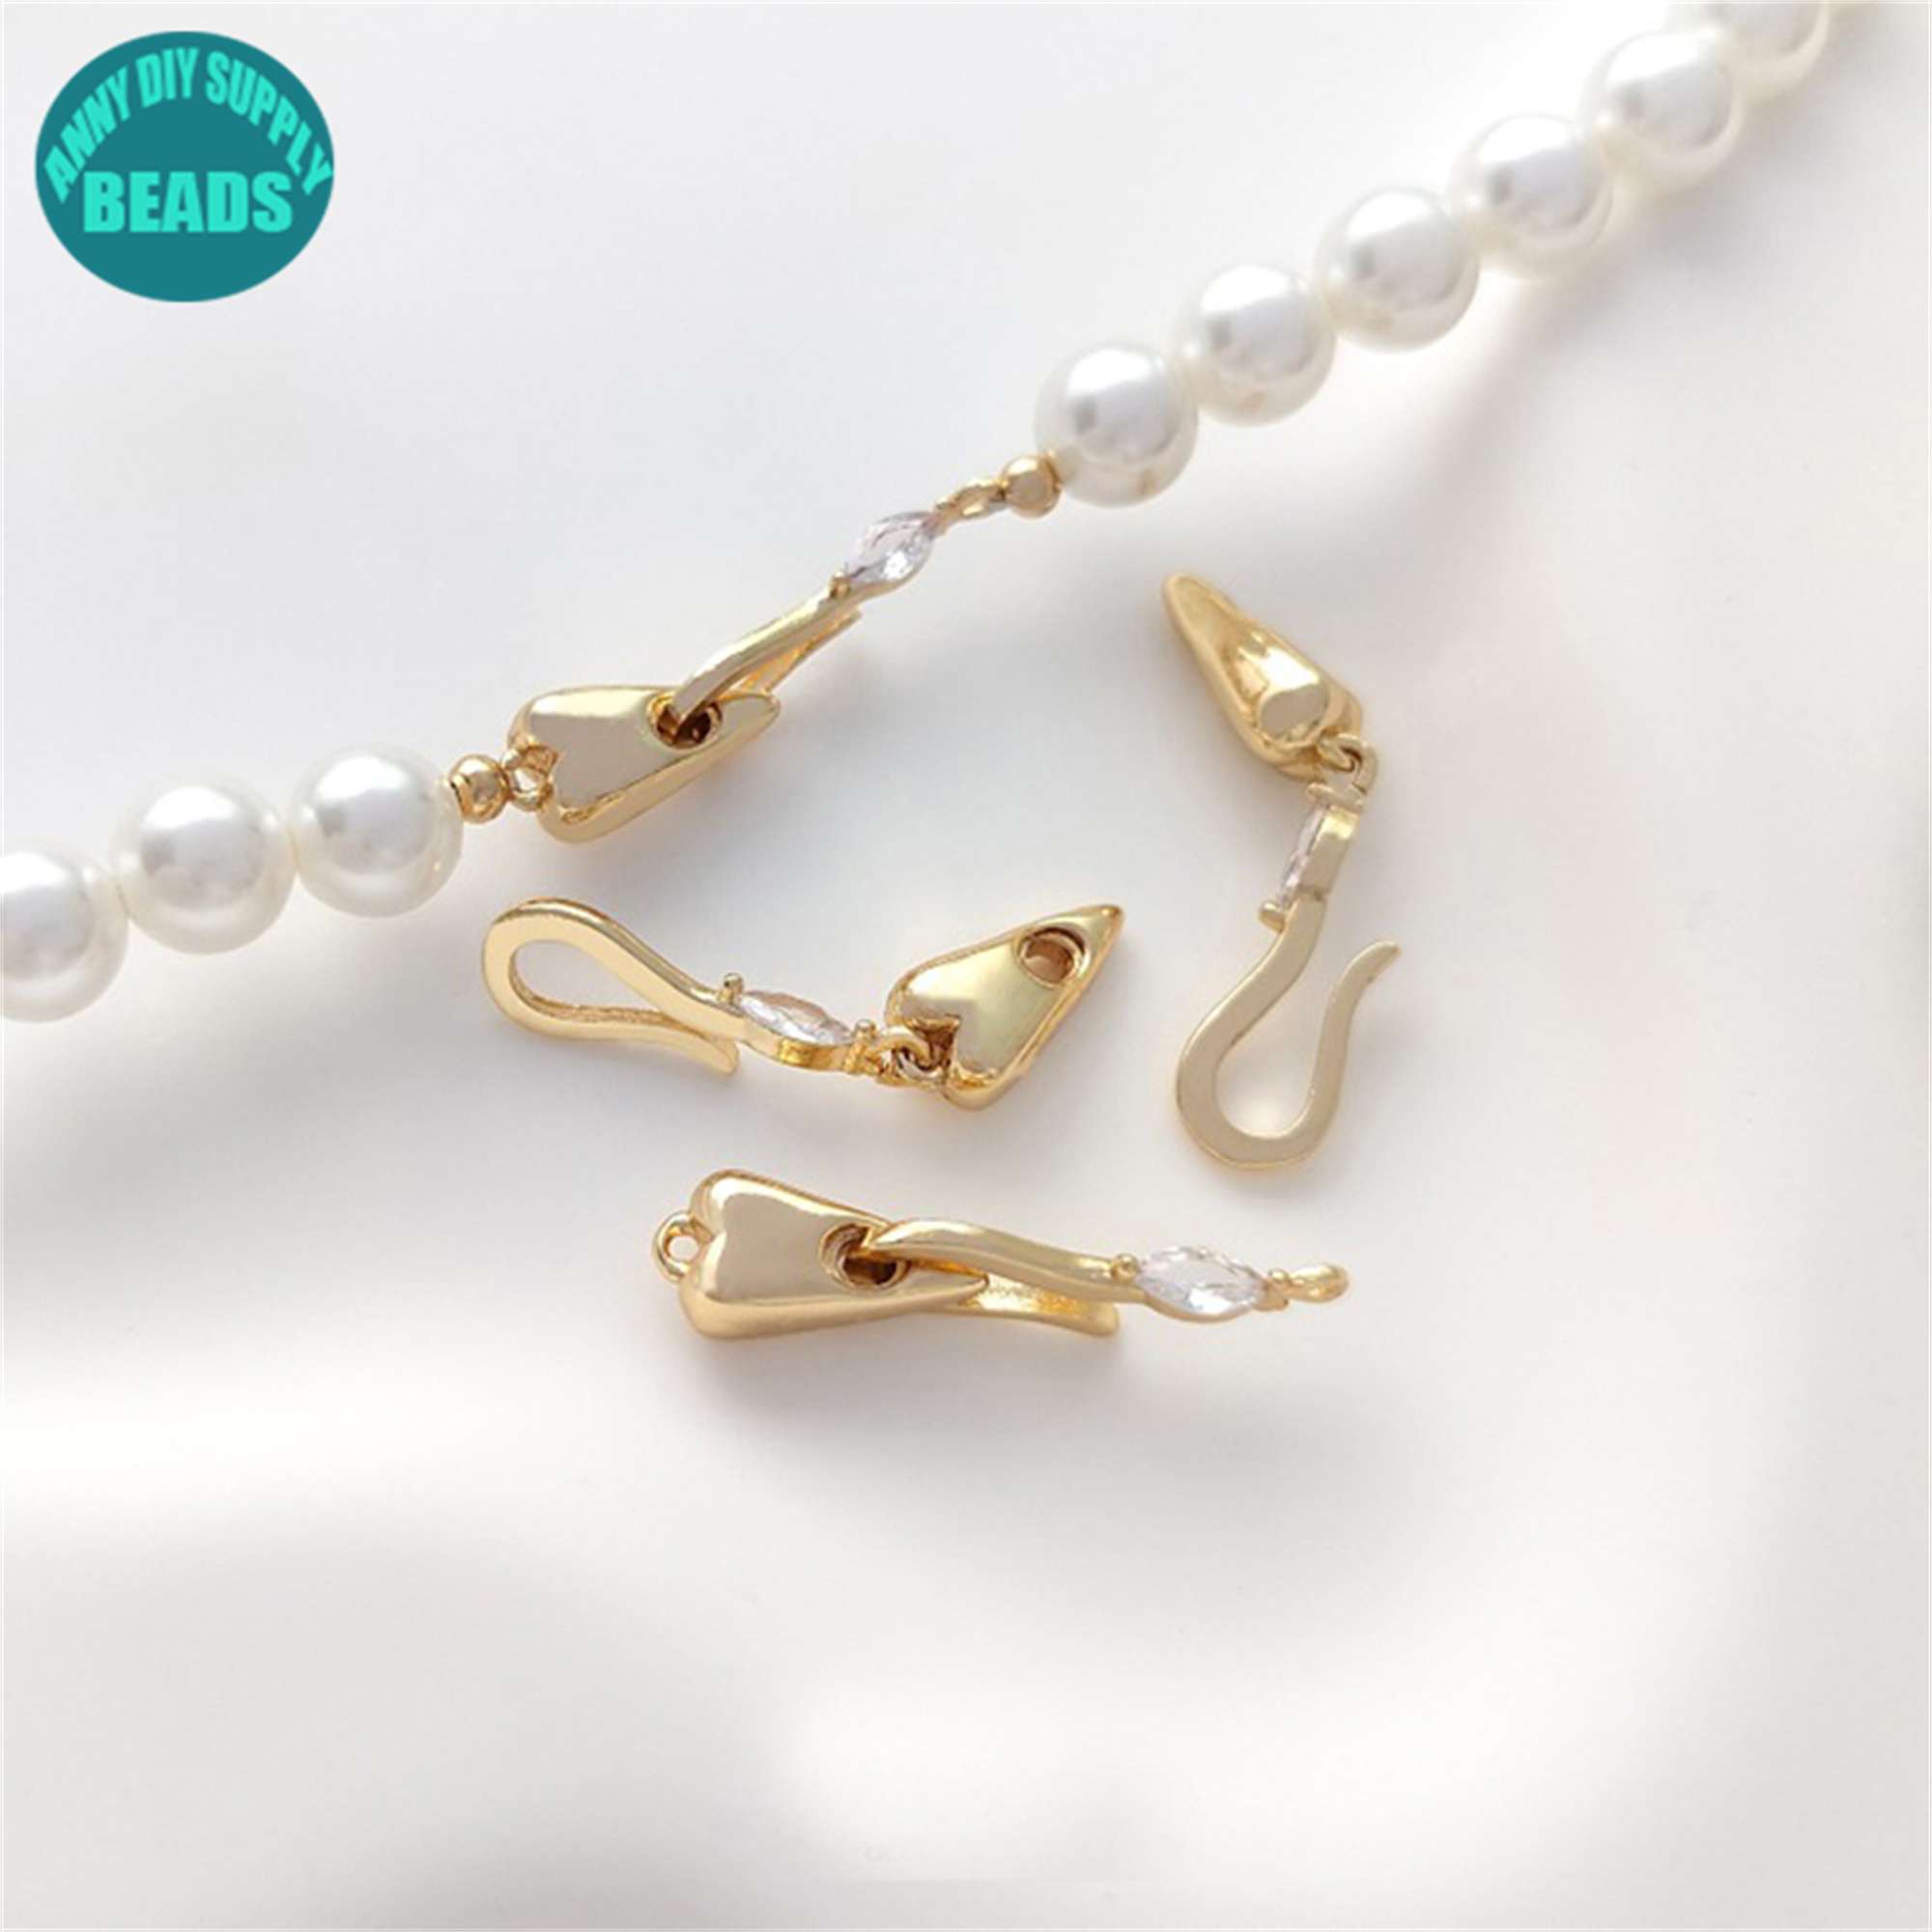 14K Gold plated Fish Hook Clasp,Heart Hook Clasp,hook and eye  clasp,Necklace Clasp,Pearl Jewelry Clasp,Necklace clasp,bracelet clasp